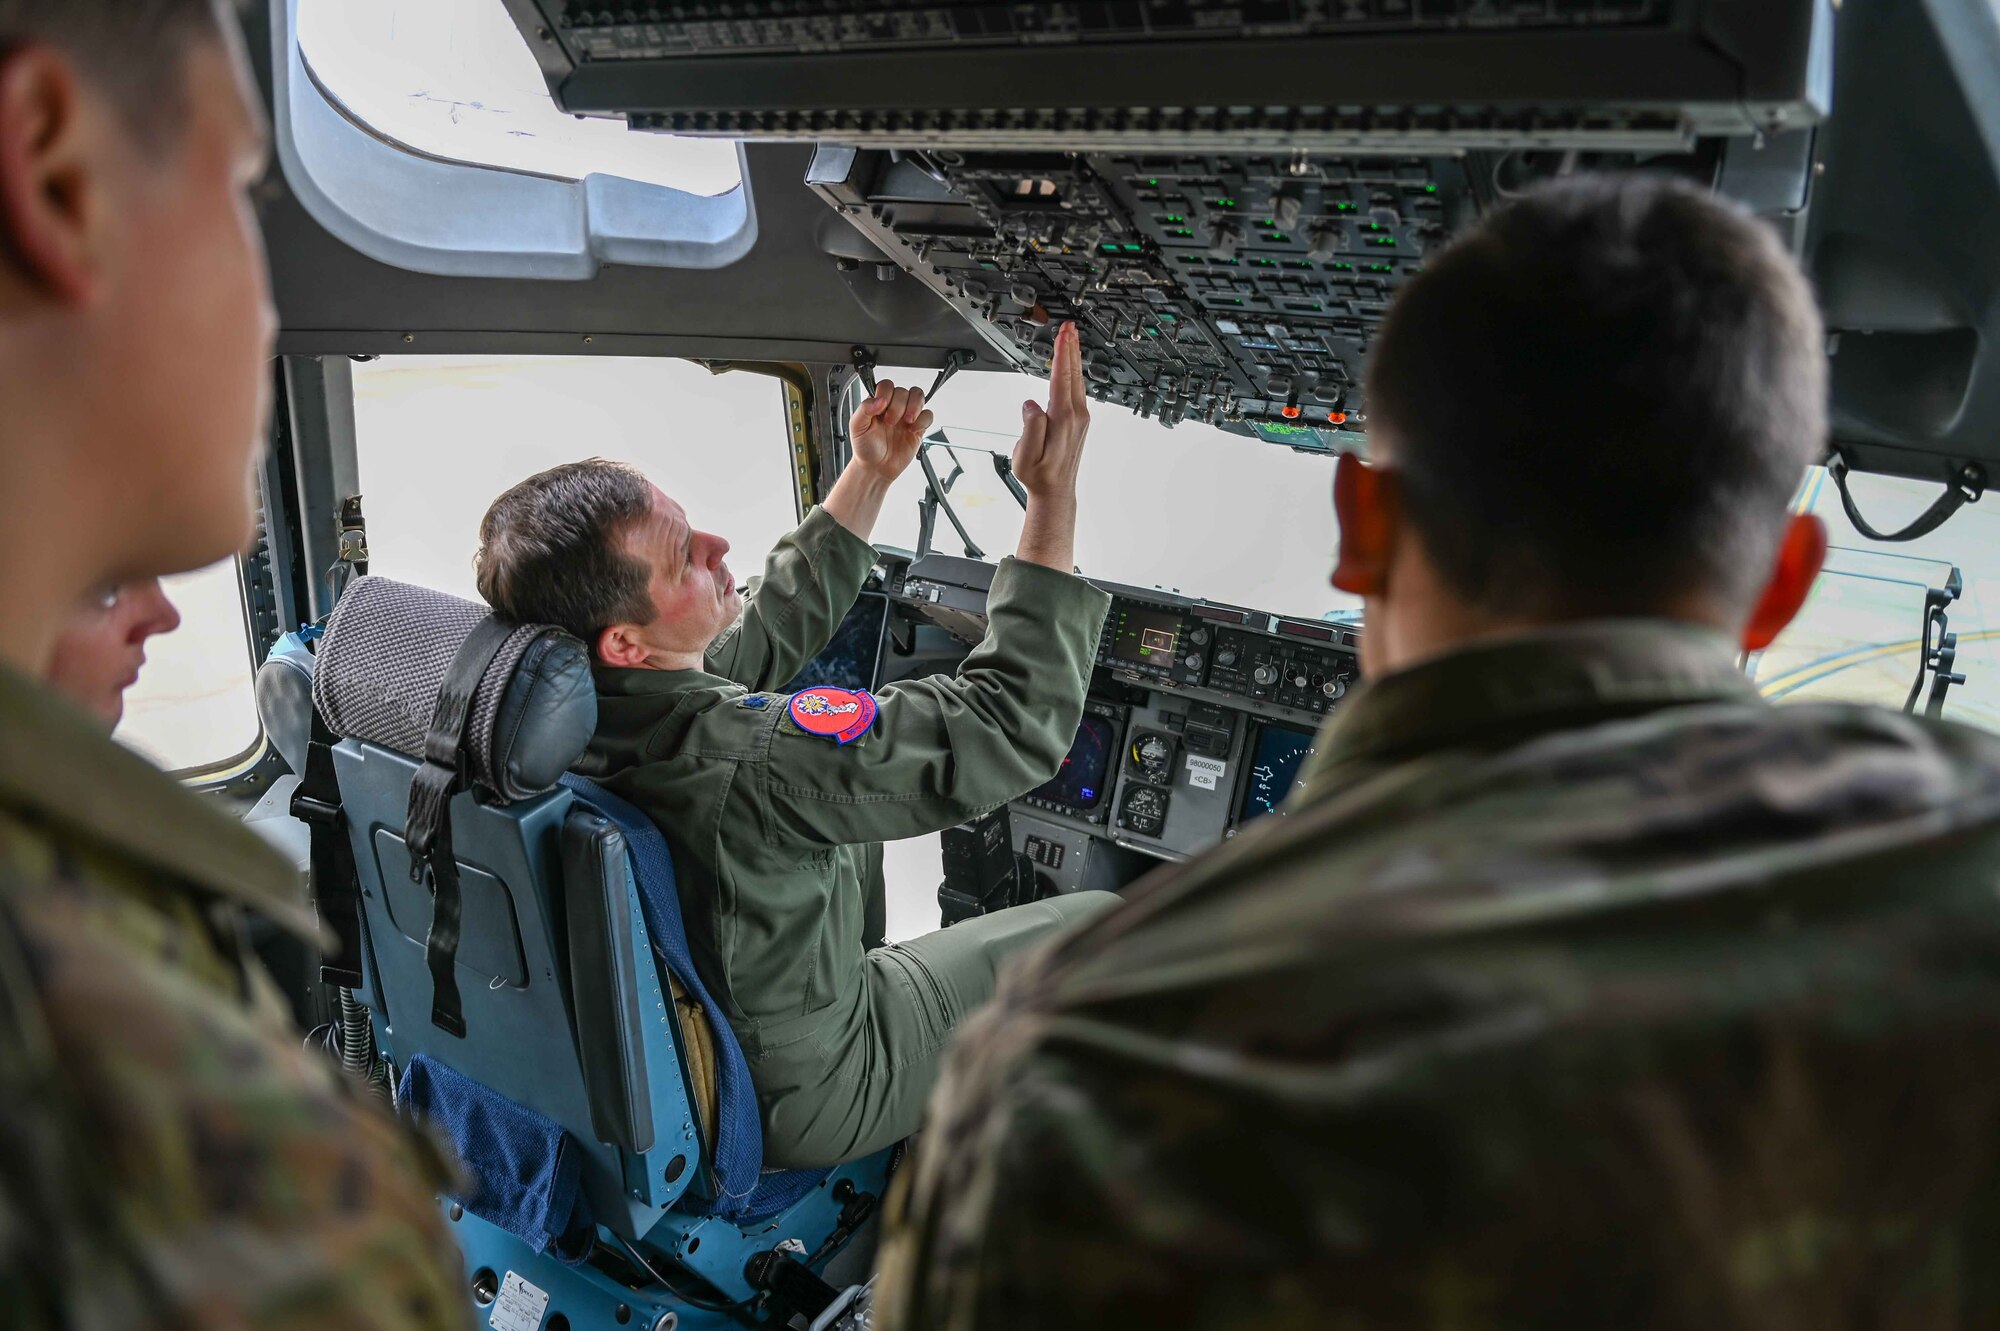 U.S. Air Force Lt. Col. Patrick McLaughlin, 97th Air Mobility Wing director of staff, shows students from the Career Enlisted Aviator (CEA) Center for Excellence the control panels on aC-17 Globemaster III at Joint Base San Antonio-Lackland, April 6, 2023. Students from across the CEA Center for Excellence were invited on to the C-17 and the KC-135 Stratotanker to tour the airplanes and learn from pilots, boom operators, and loadmasters from Altus. (U.S. Air Force photo by Airman 1st Class Kari Degraffenreed)